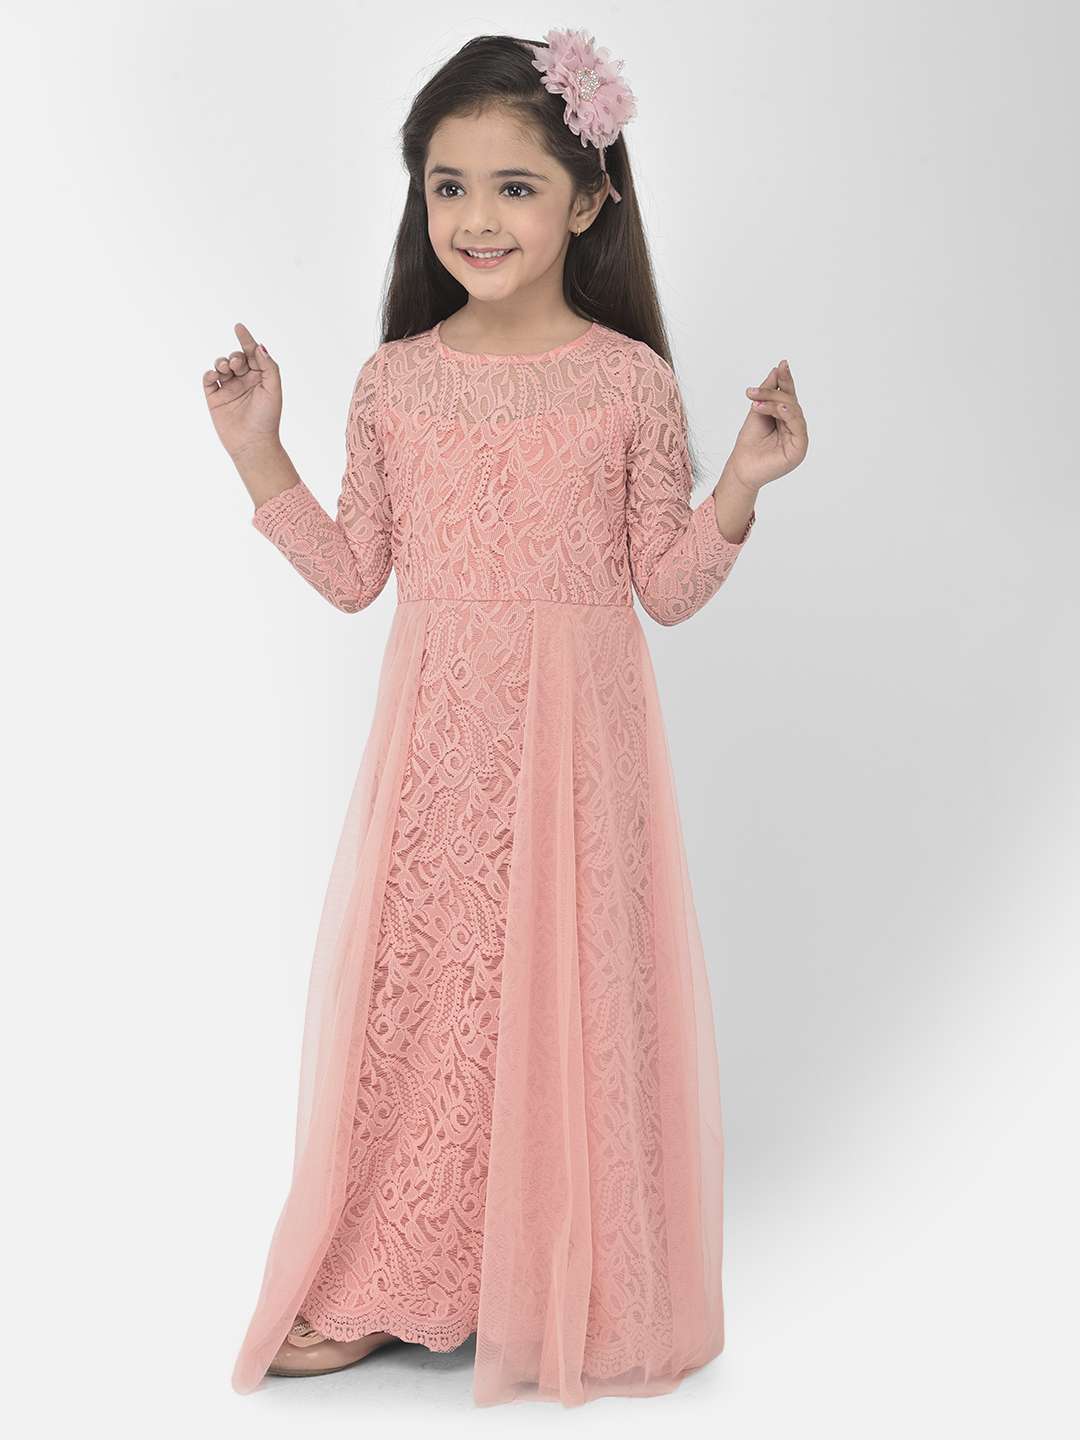 Mmoitkki Girls Floral Maxi Dresses with Pockets Kids India | Ubuy